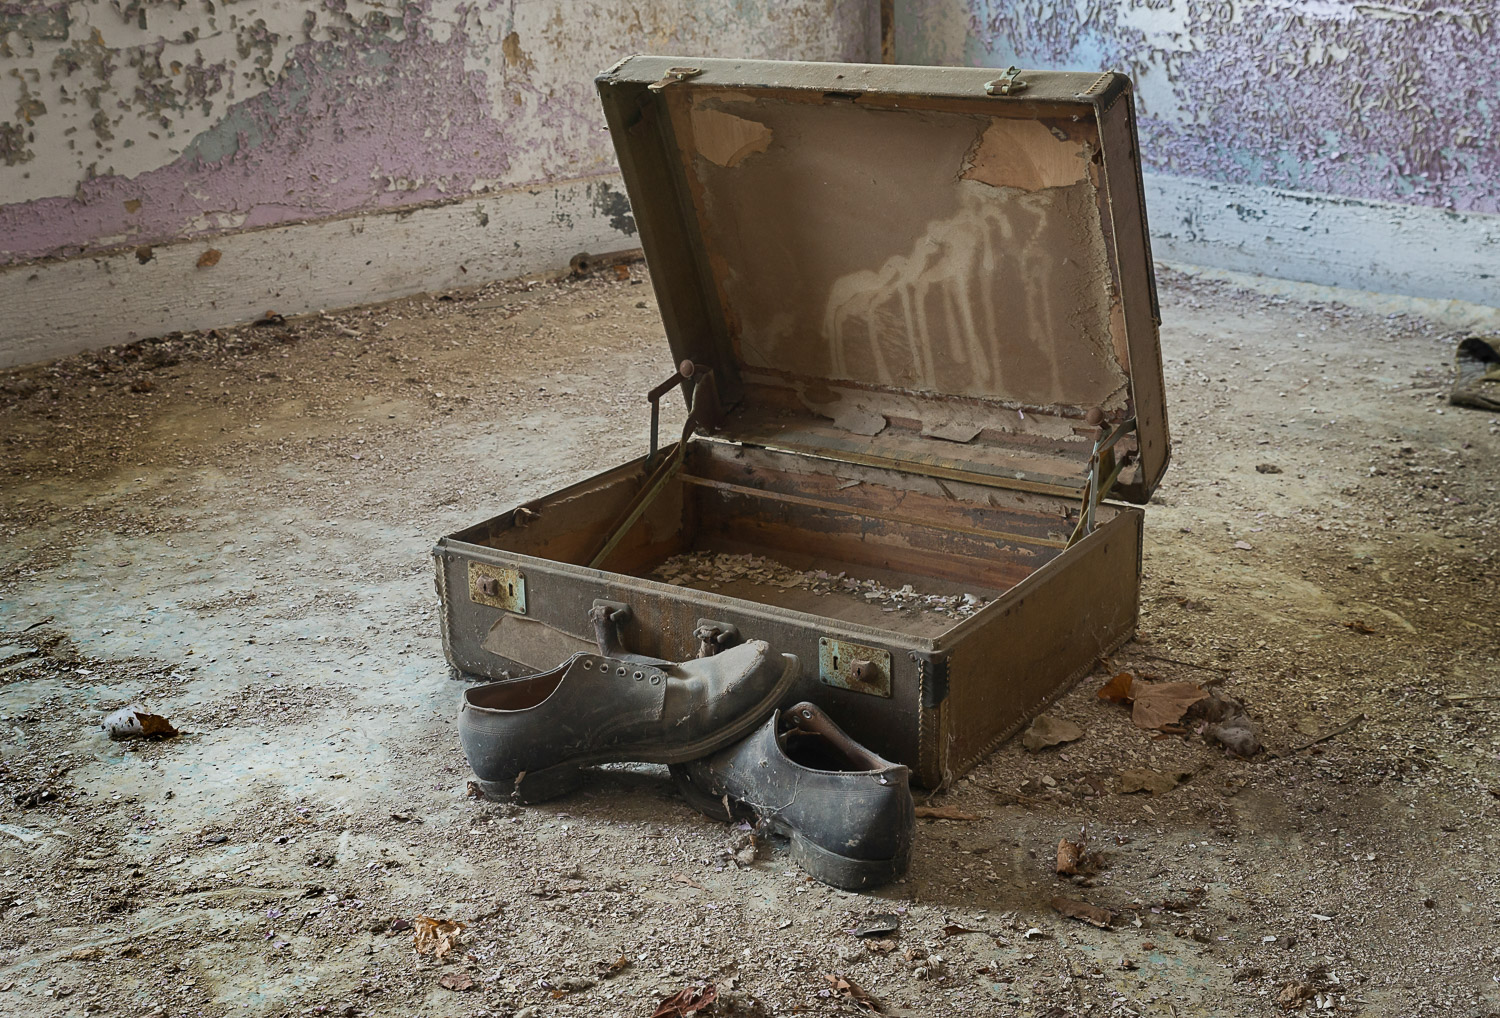 An old briefcase and shoes left behind at an old Ohio poorhouse.